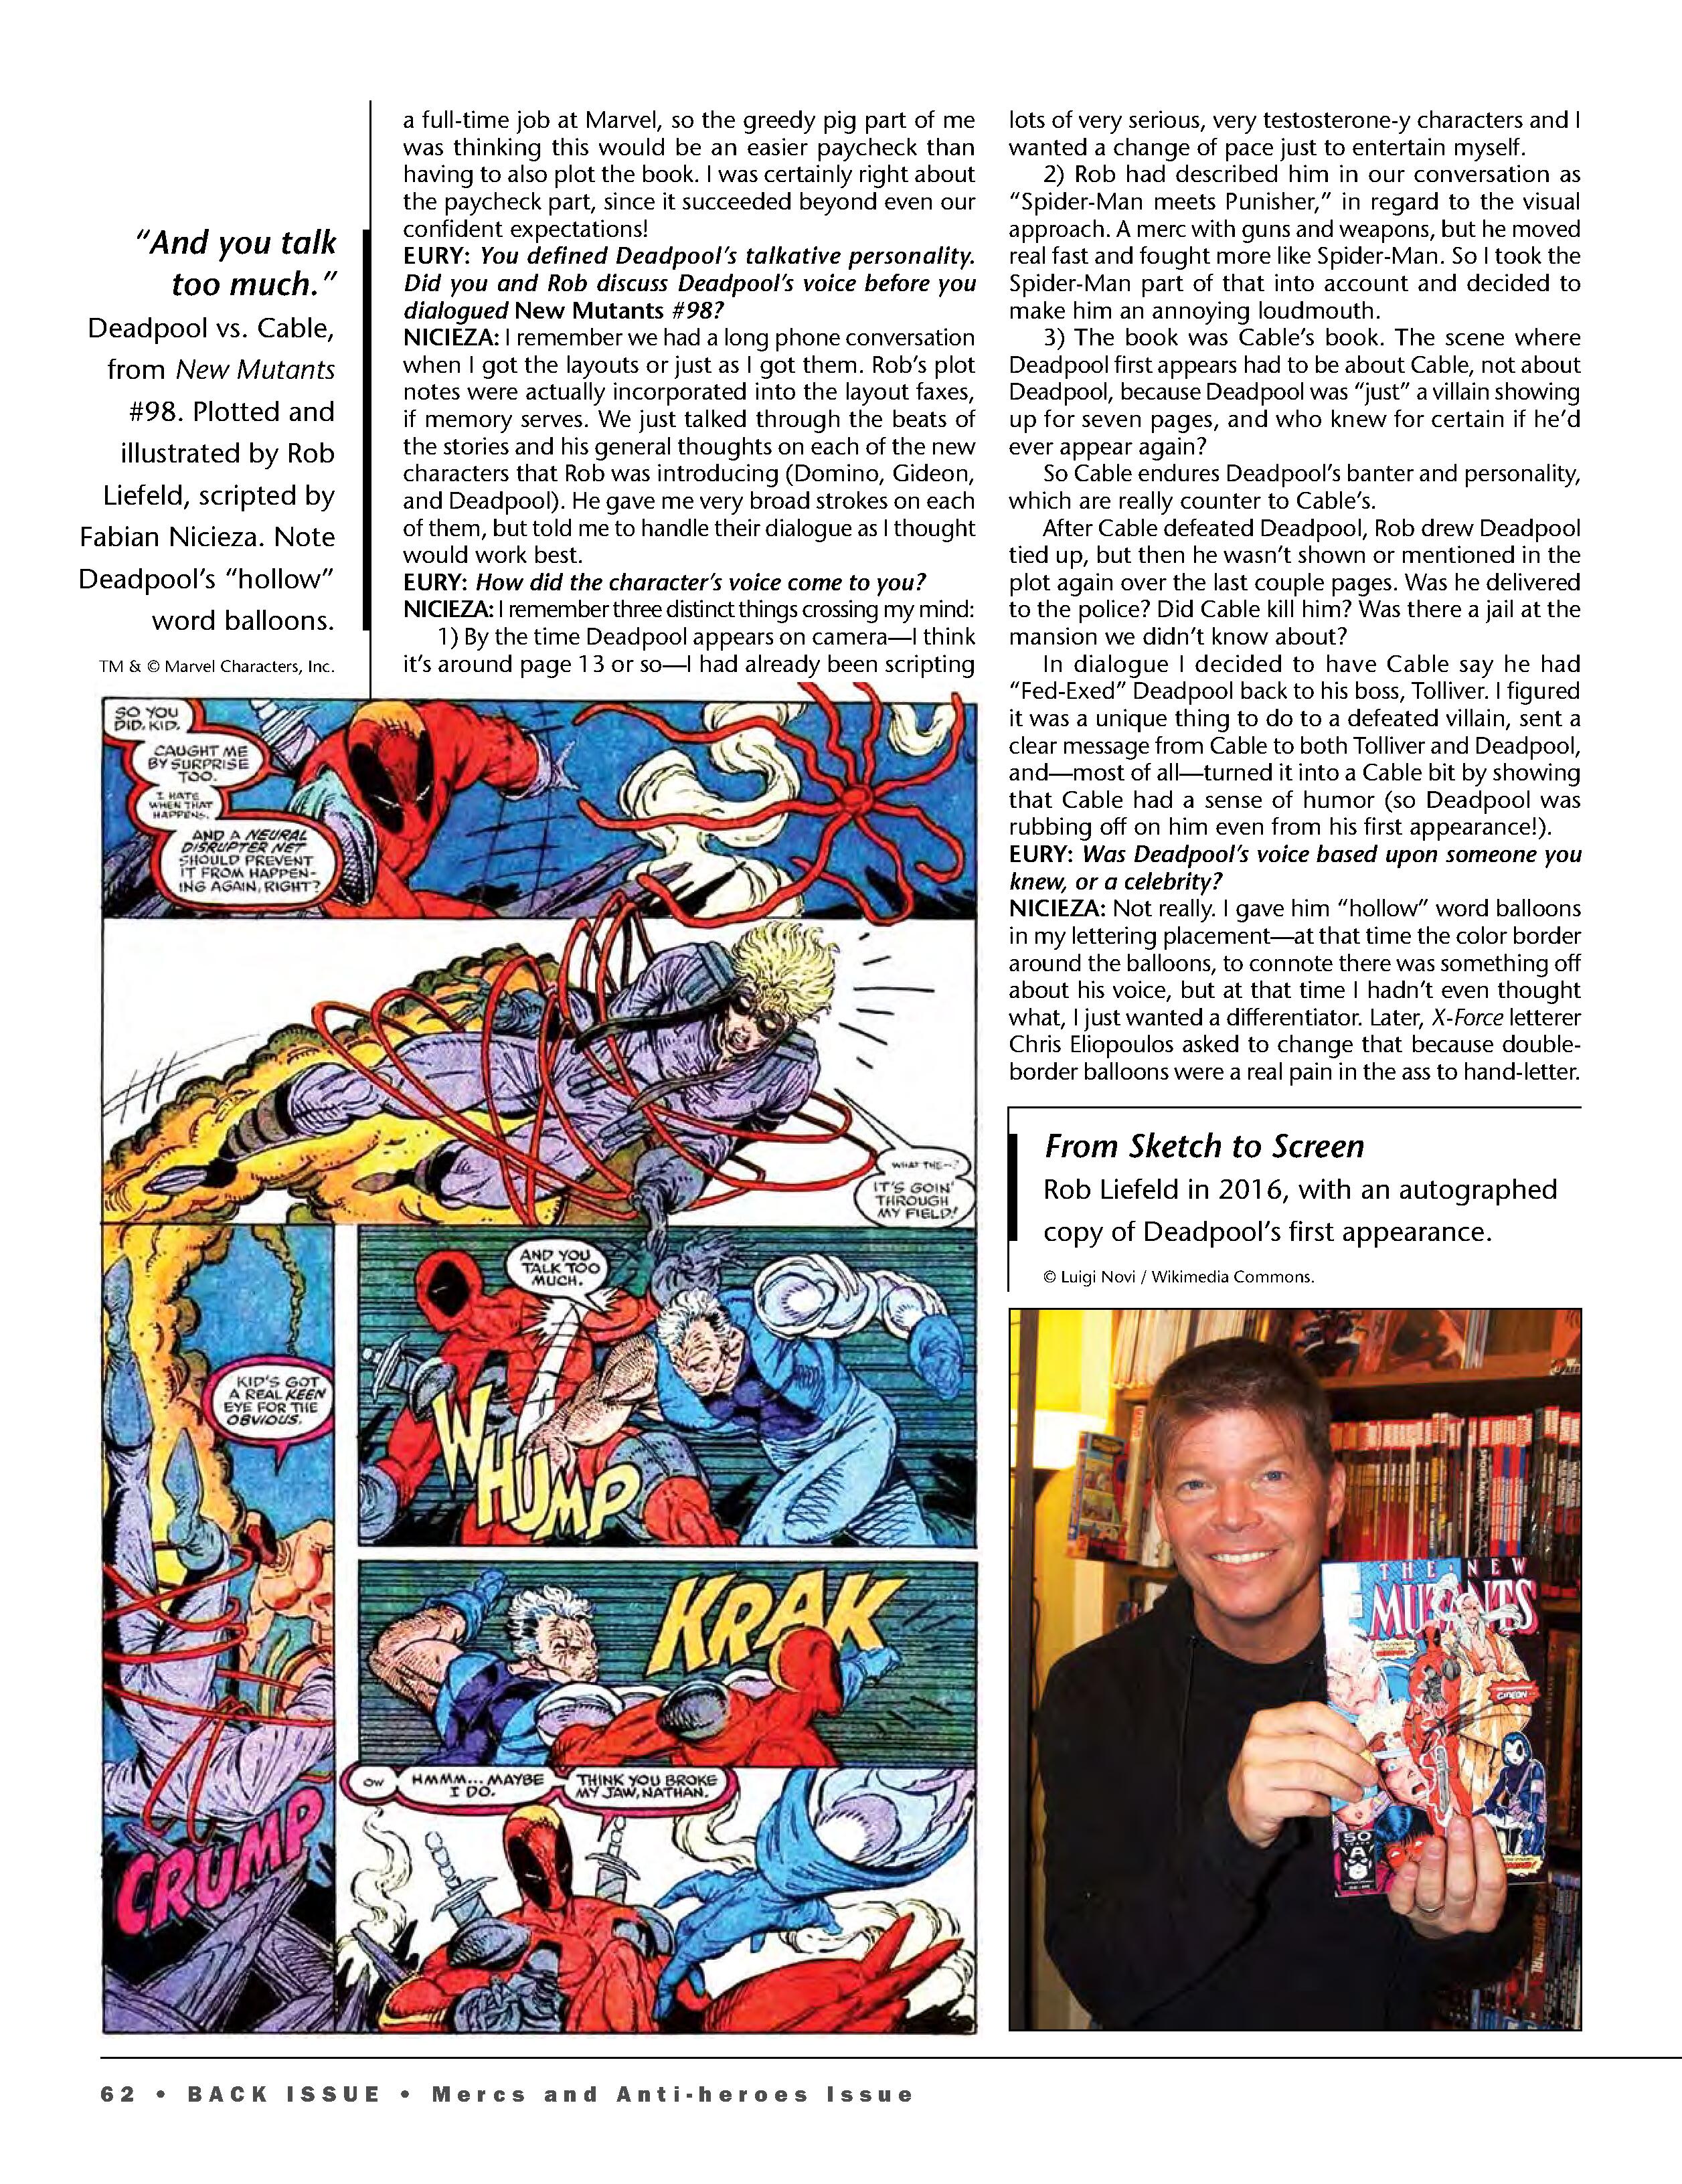 Read online Back Issue comic -  Issue #102 - 64